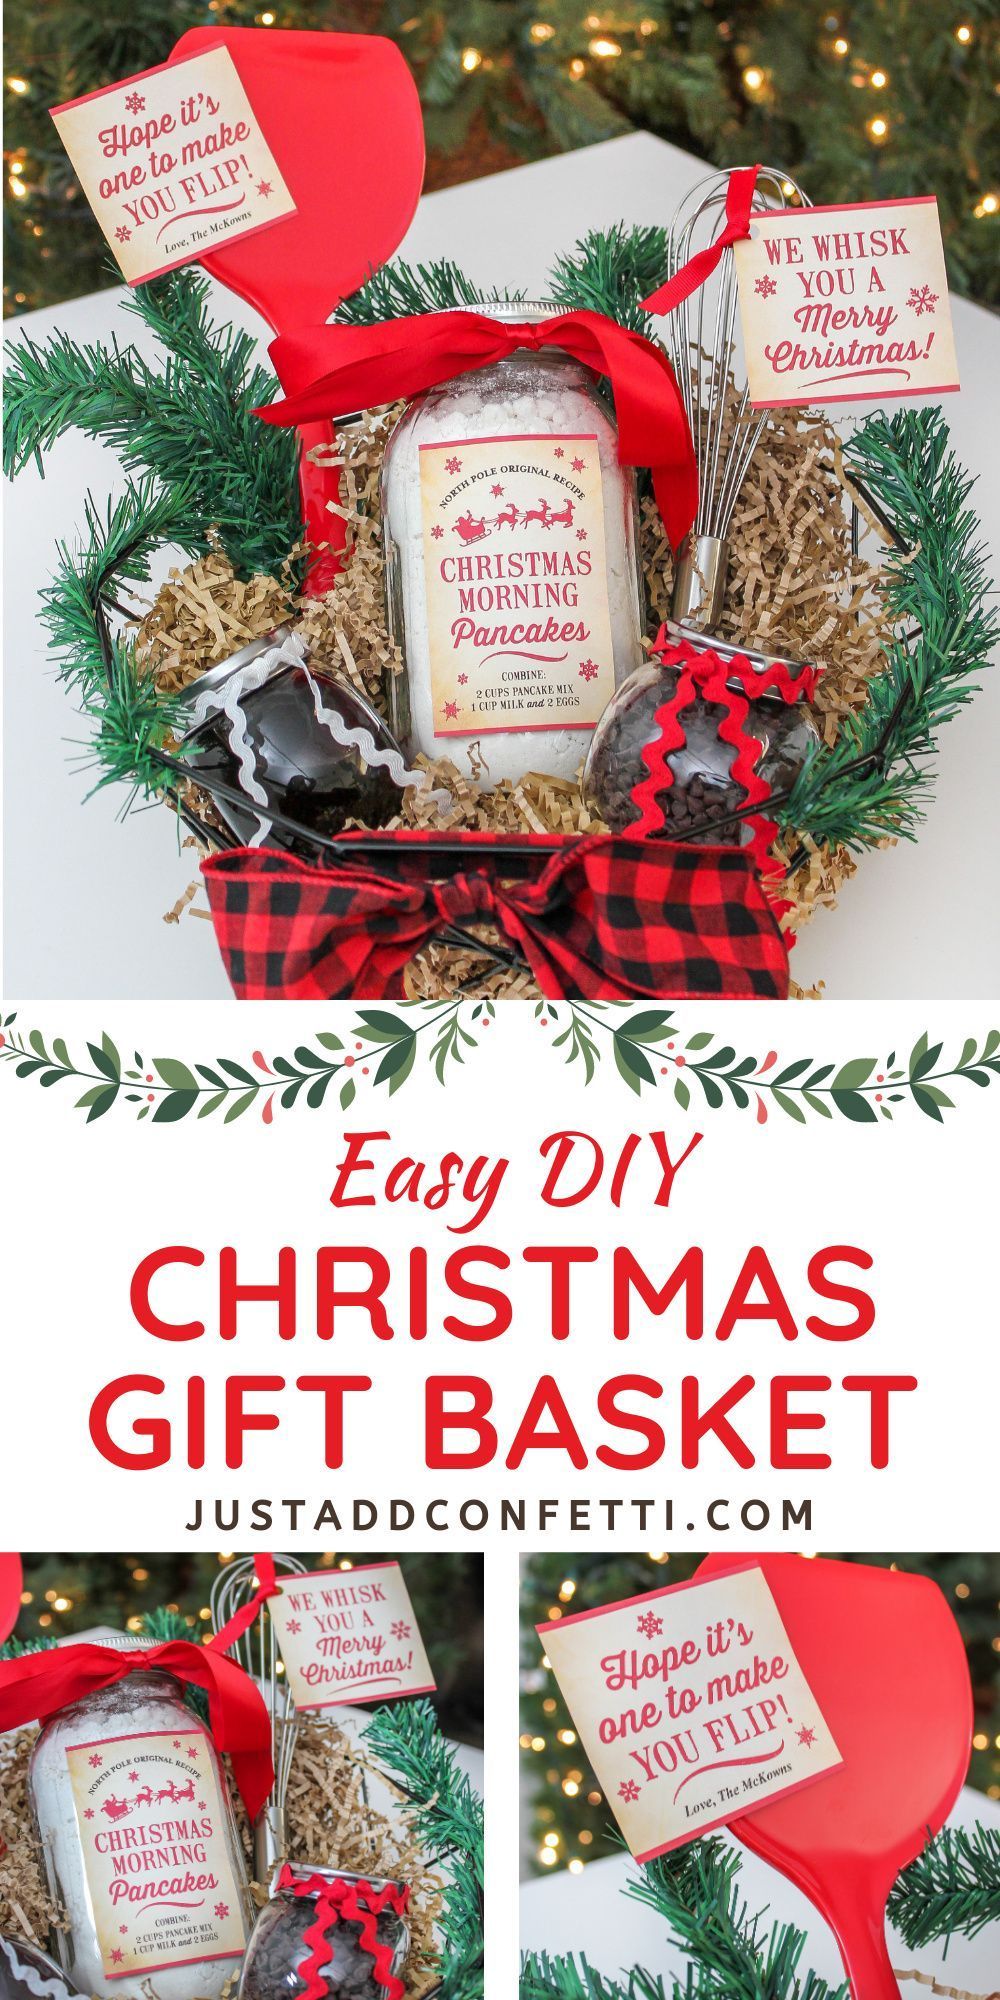 Easy DIY Christmas Gift Basket -   19 xmas gifts for coworkers cheap ideas